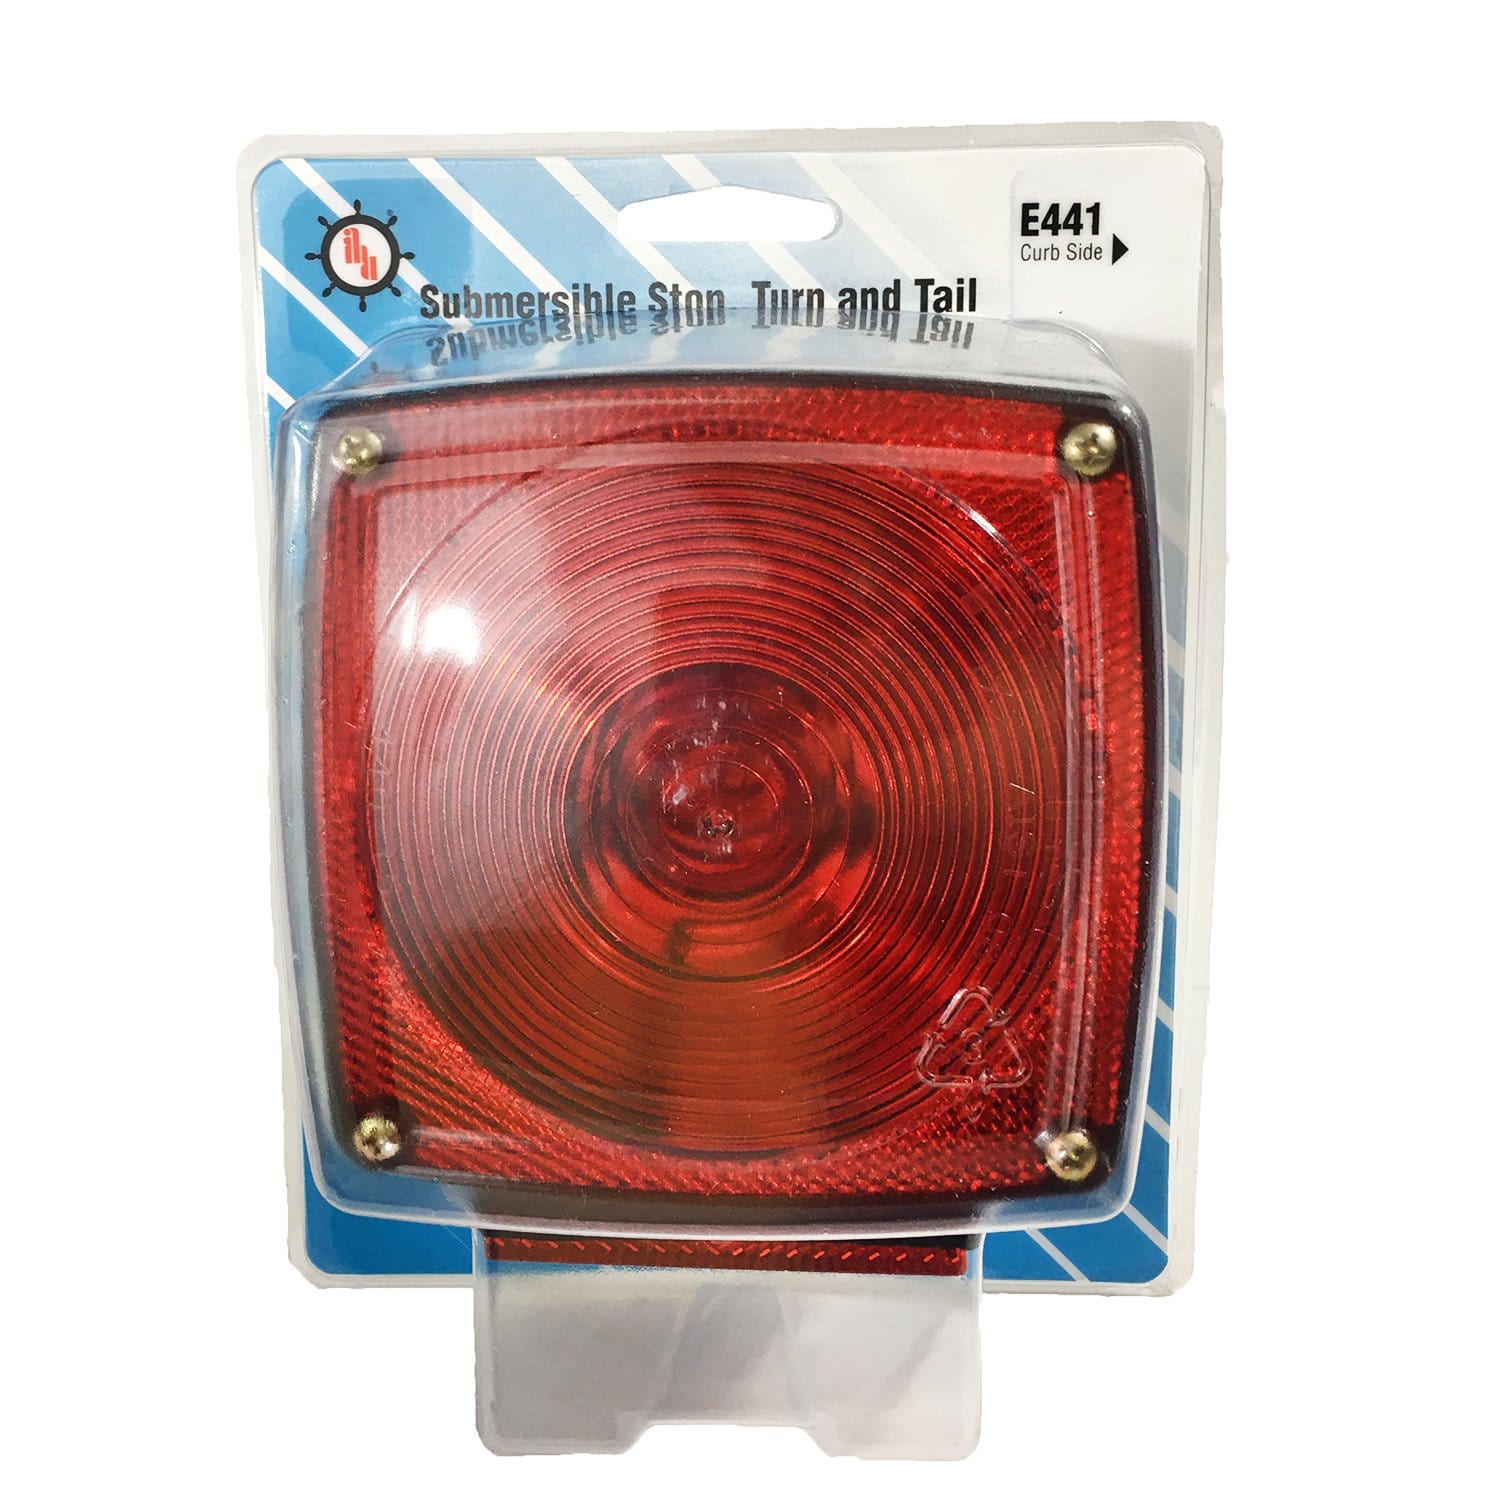 Peterson Manufacturing / Anderson Marine E441 Rectangular Surface Mount Submersible Tail Light 4.75" RH Red